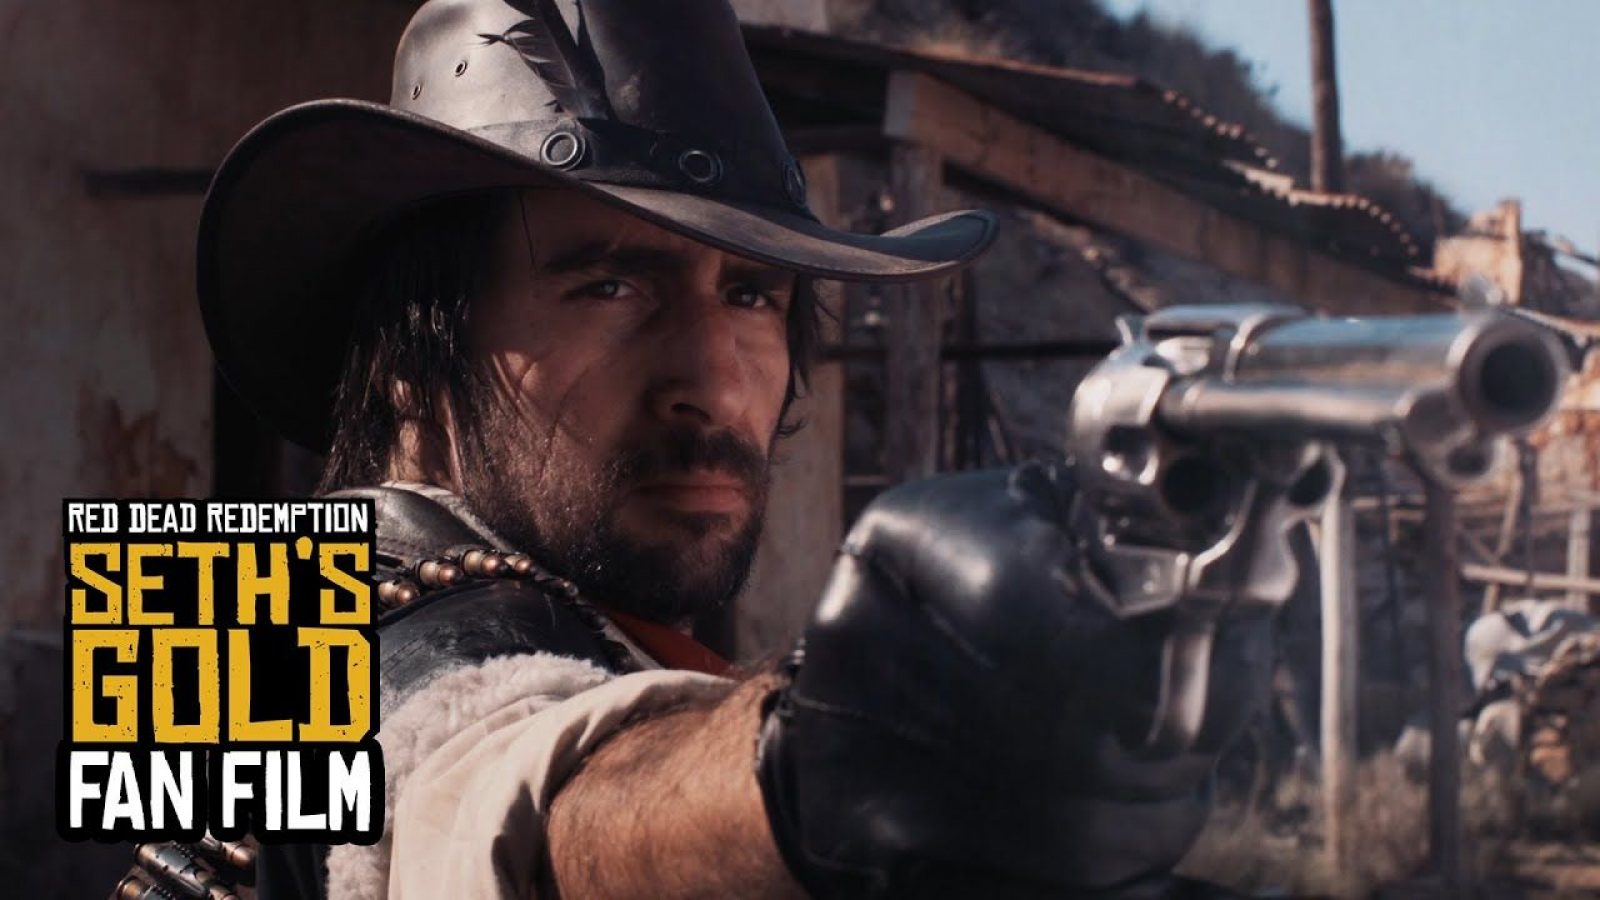 Red Dead Redemption: Seth’s Gold